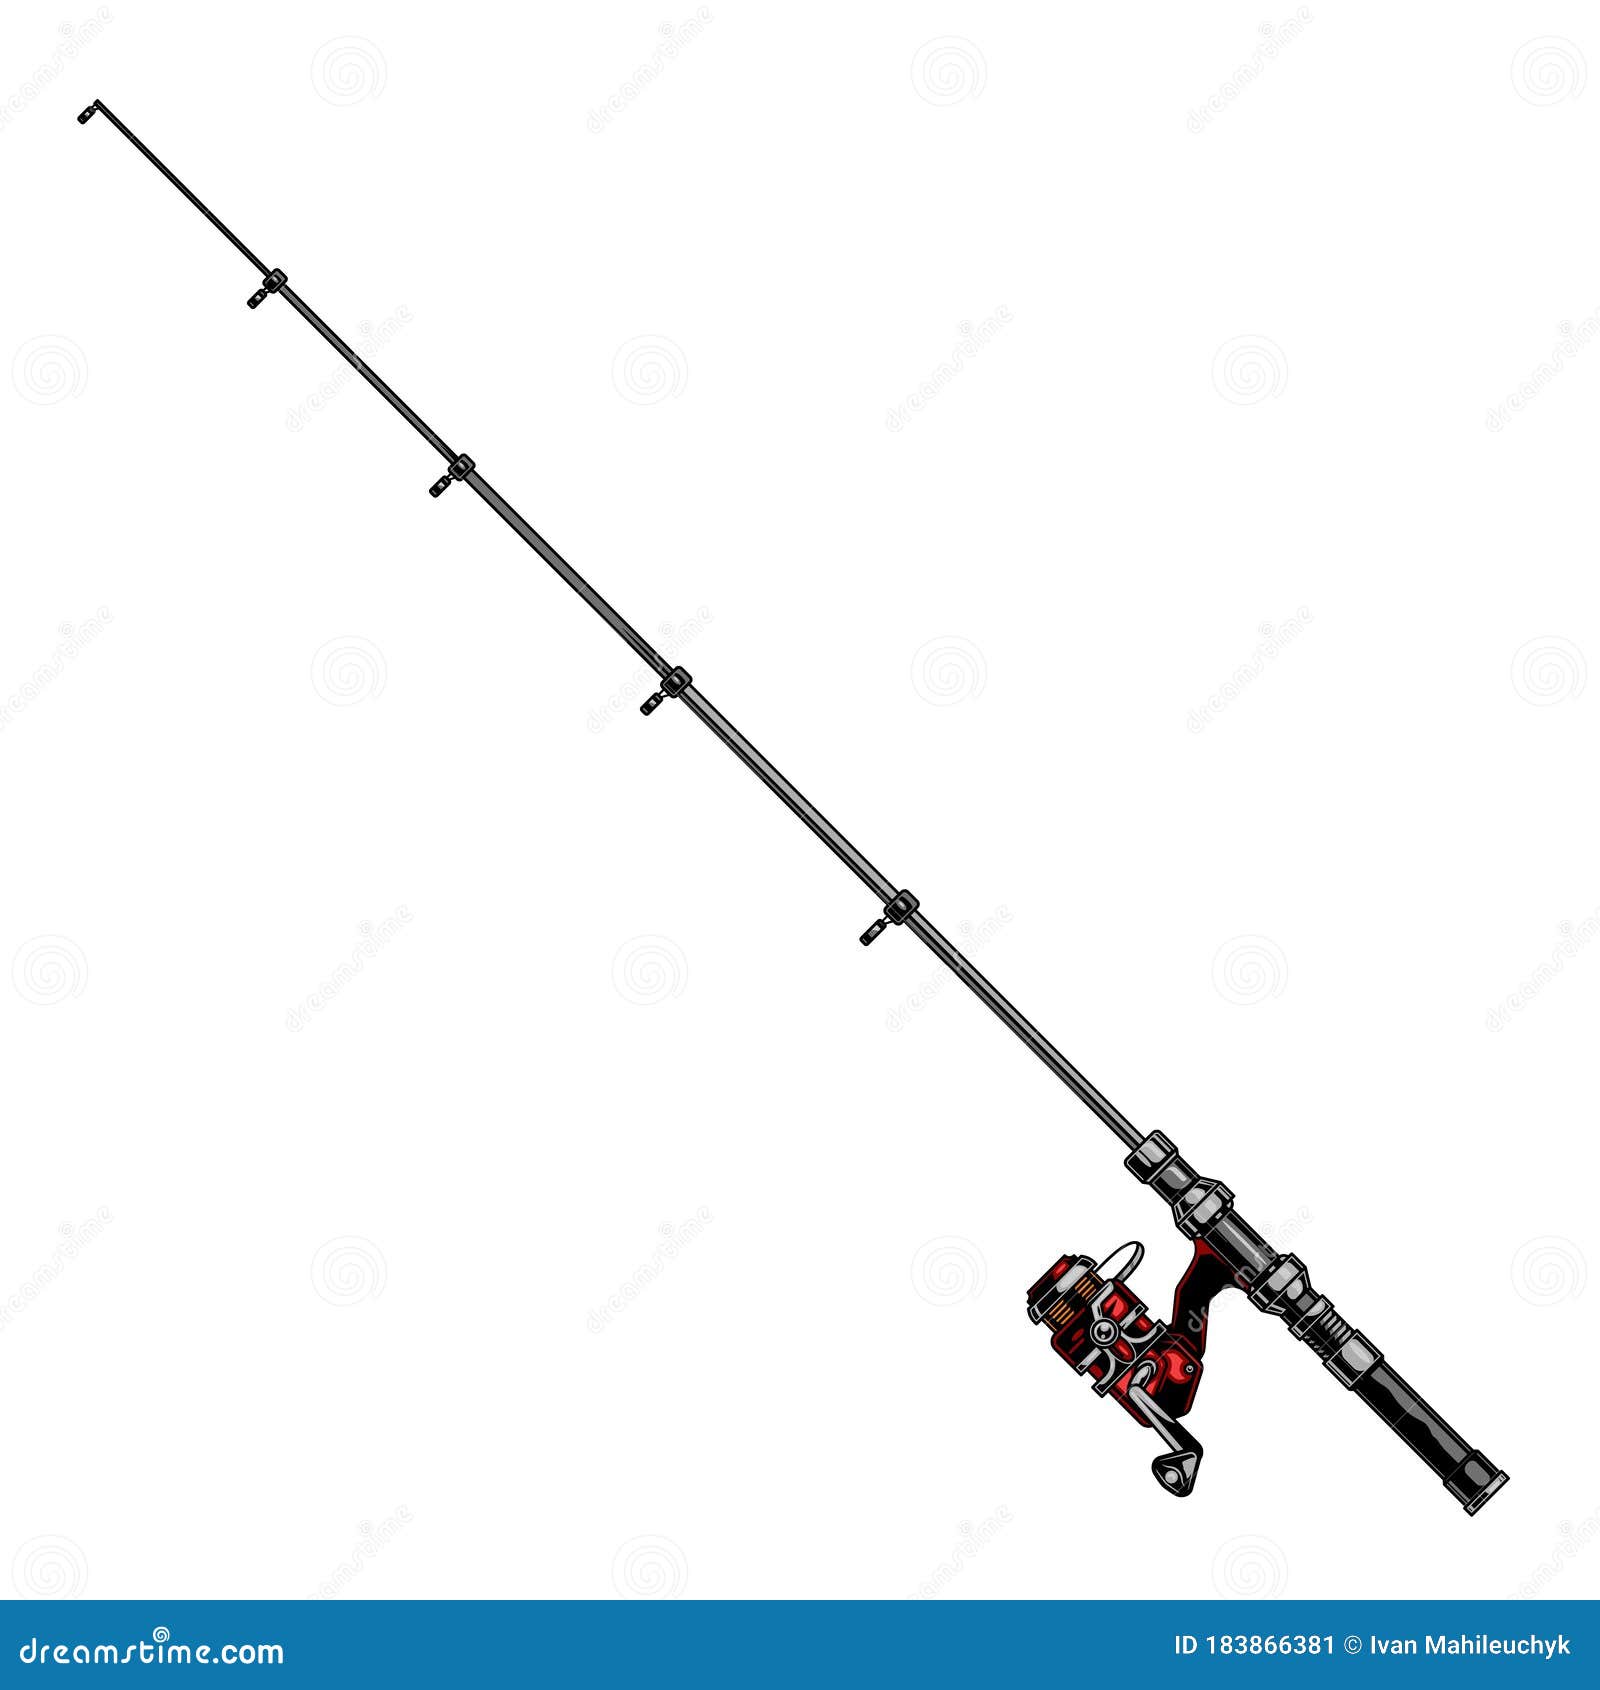 https://thumbs.dreamstime.com/z/telescopic-fishing-rod-colorful-template-vintage-style-isolated-vector-illustration-183866381.jpg